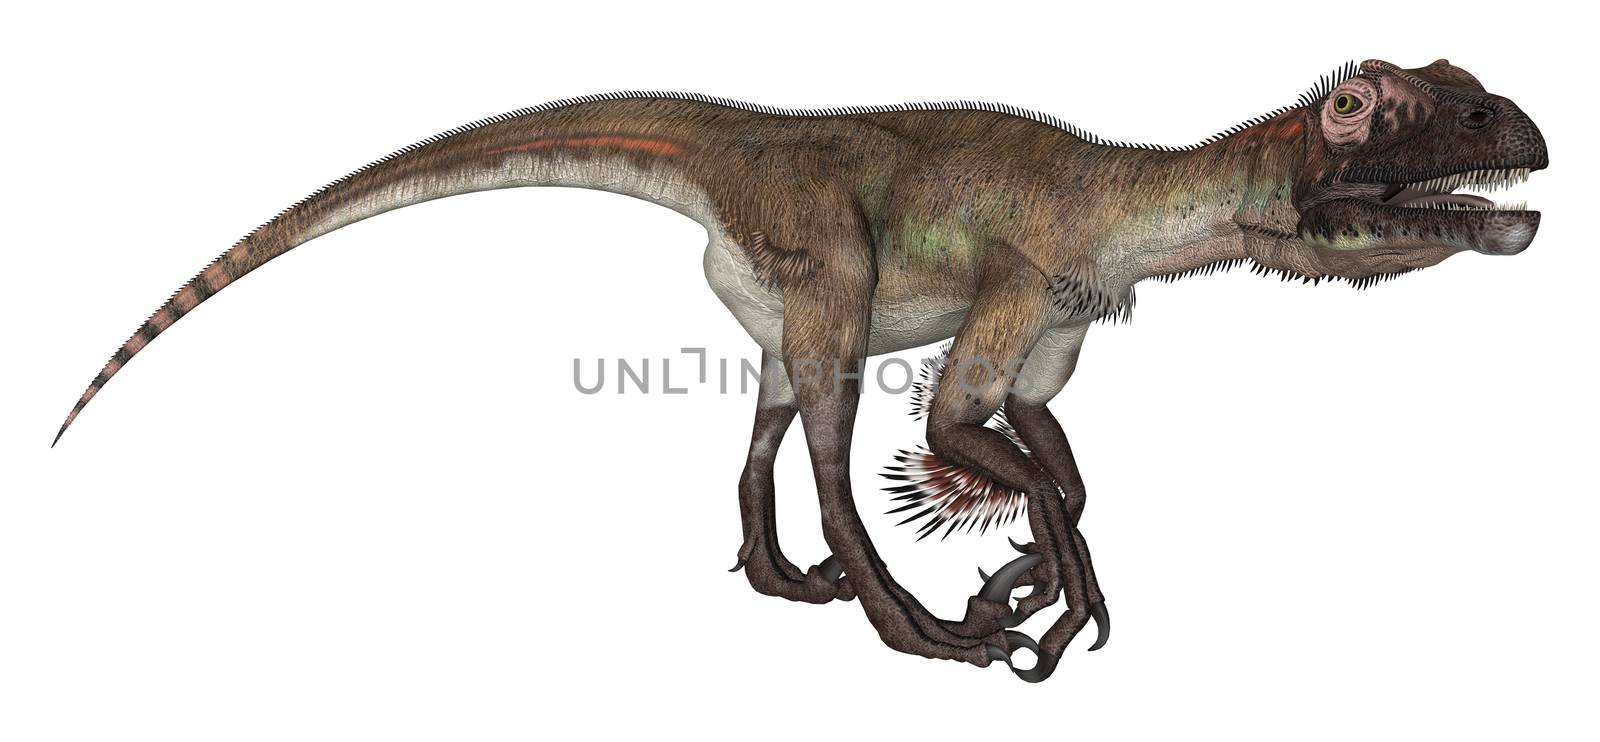 3D digital render of a curious dinosaur utahraptor looking down isolated on white background